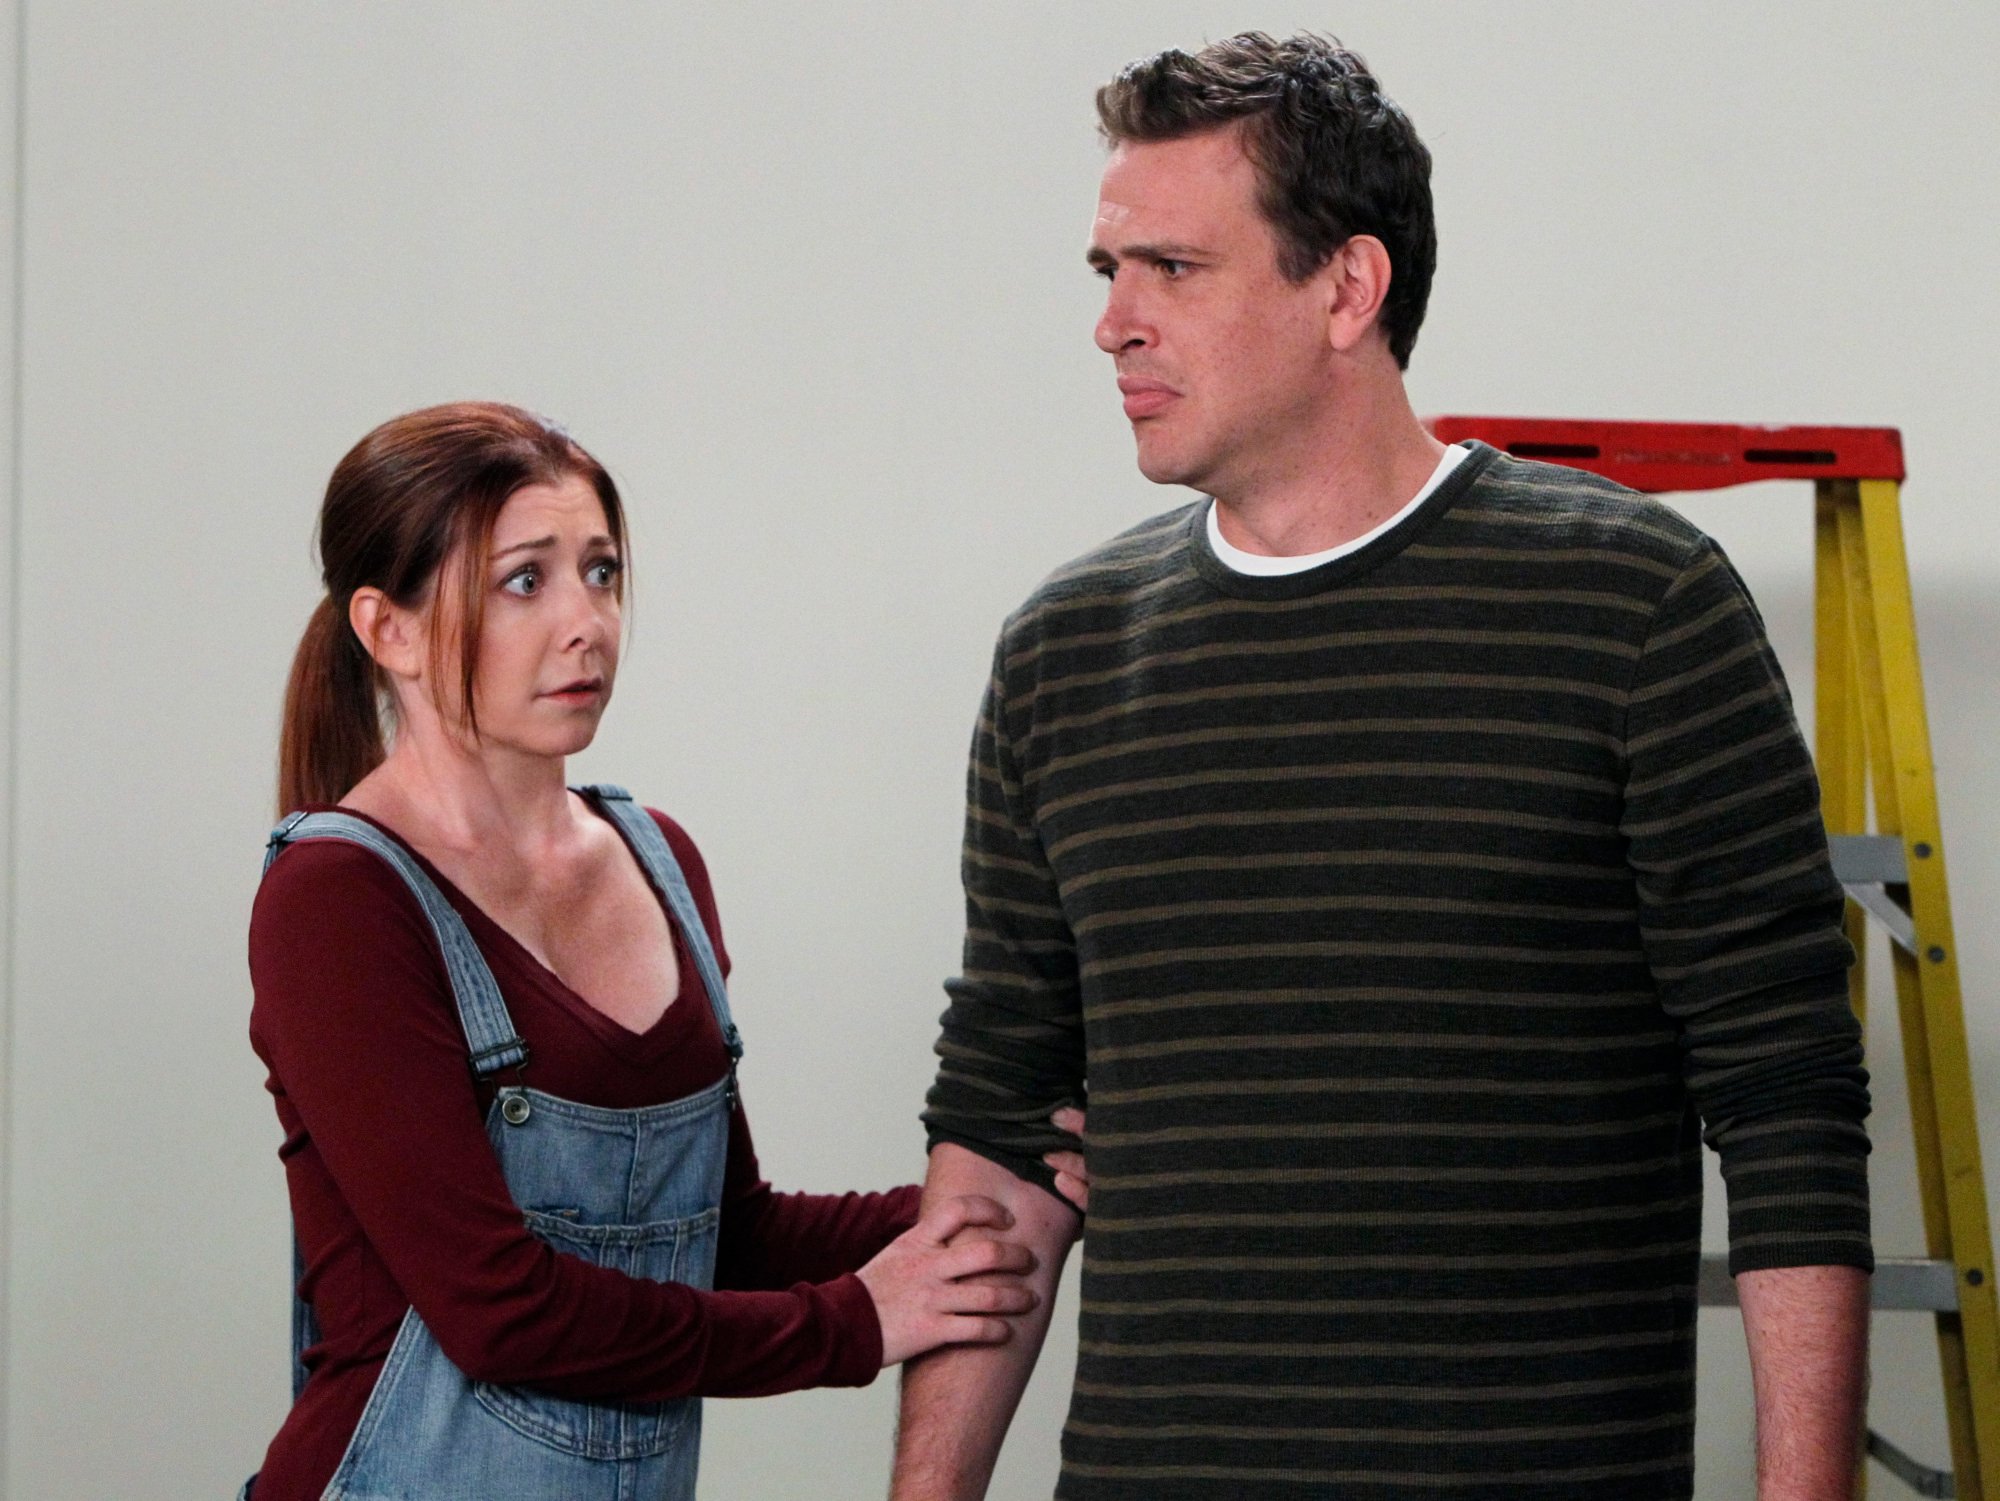 ‘How I Met Your Mother’: Alyson Hannigan and Jason Segel’s Chemistry Saved His Audition